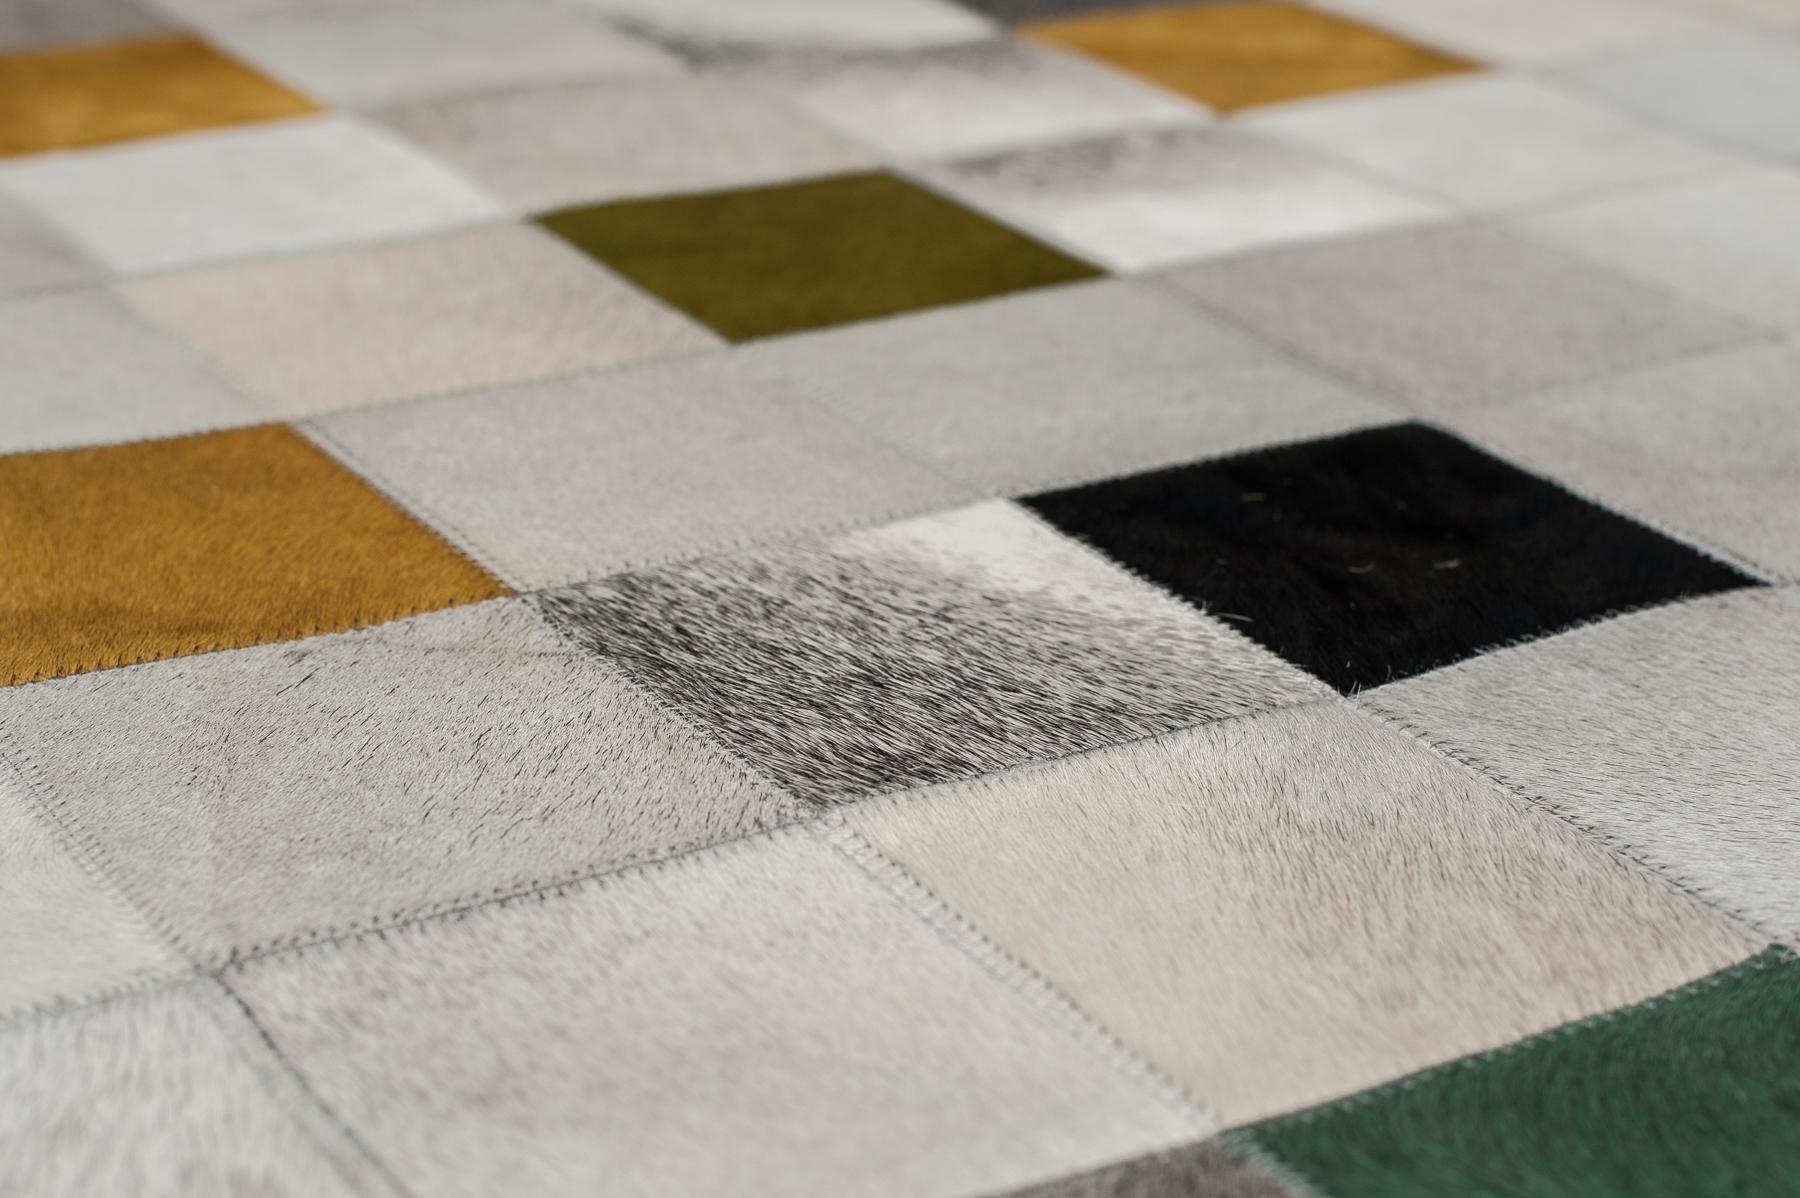 A playful, yet striking new release under our Alta line, the Falling Squares rug will add spades of charisma and sophistication to your interior. The Verde colorway is combined with natural grey shades to create a warm and rich texture on your